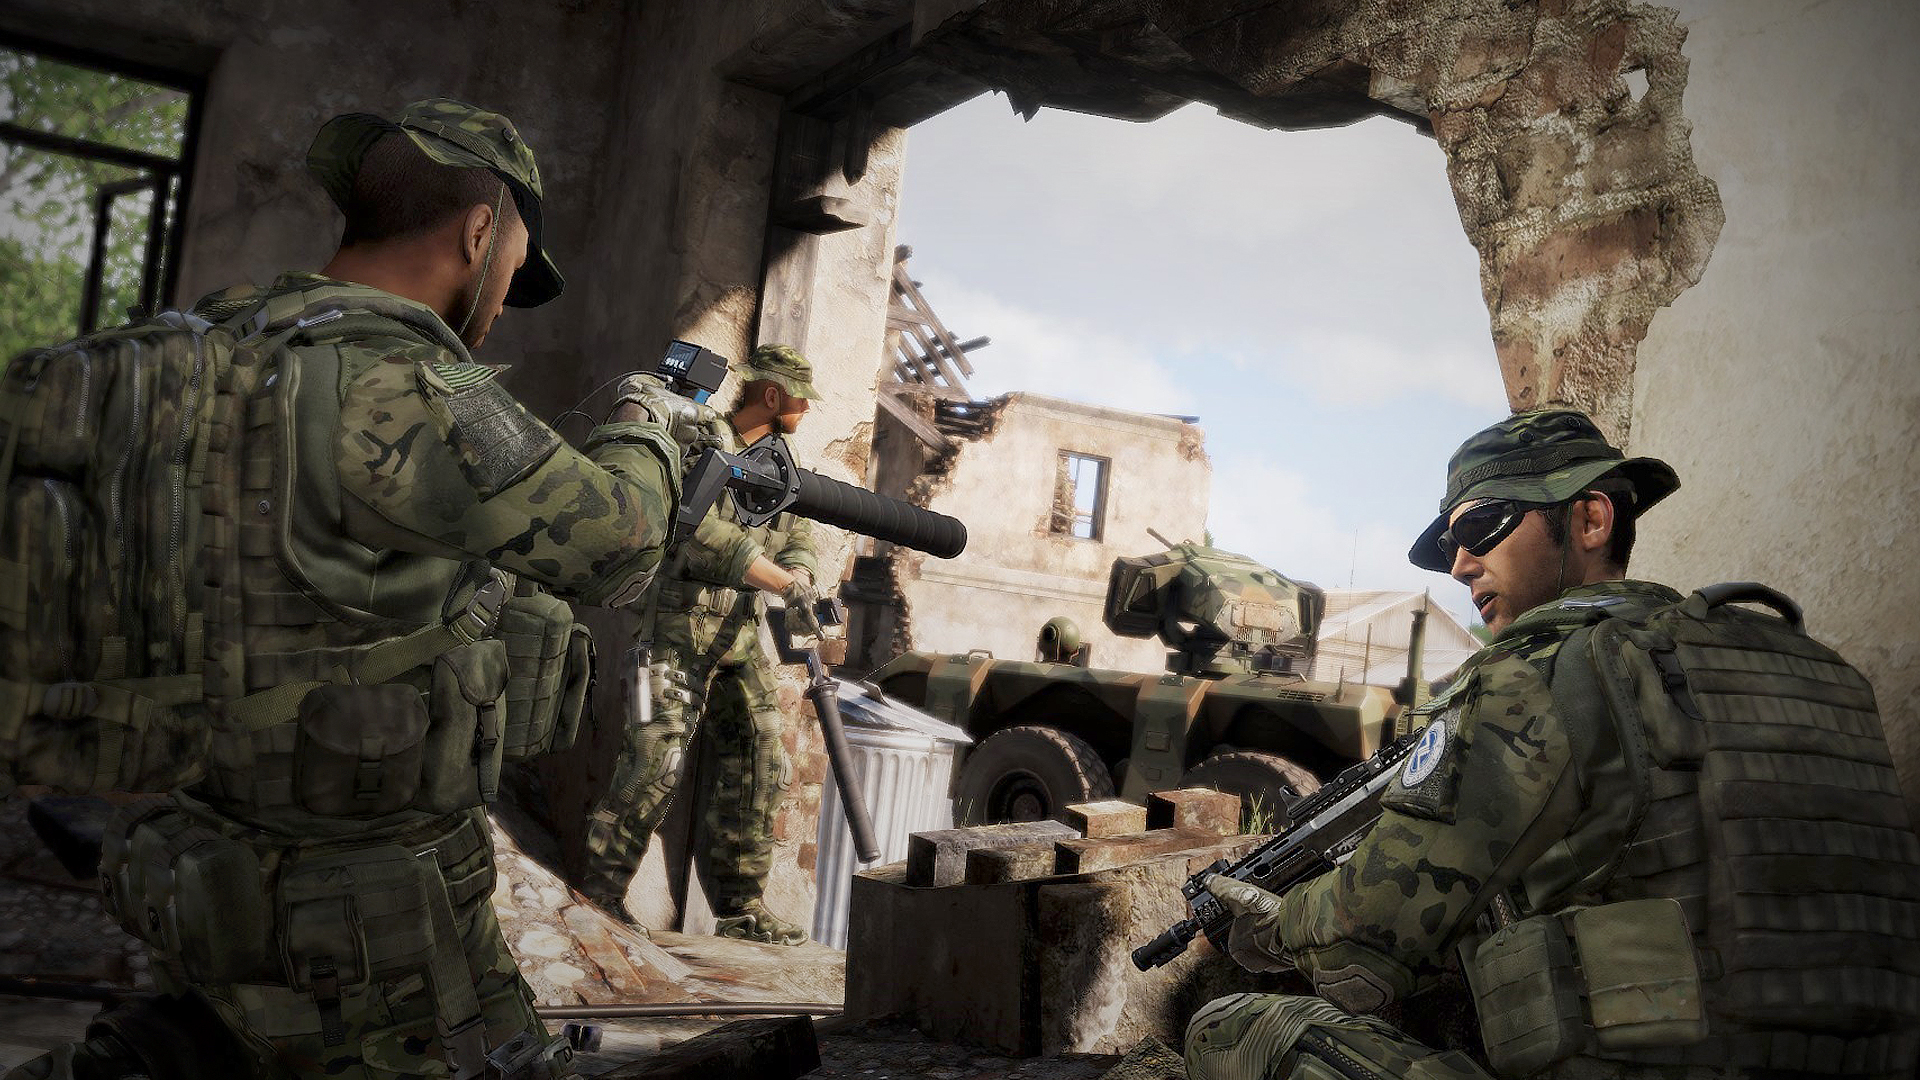 Arma 3' devs are offering no questions asked refunds for latest DLC